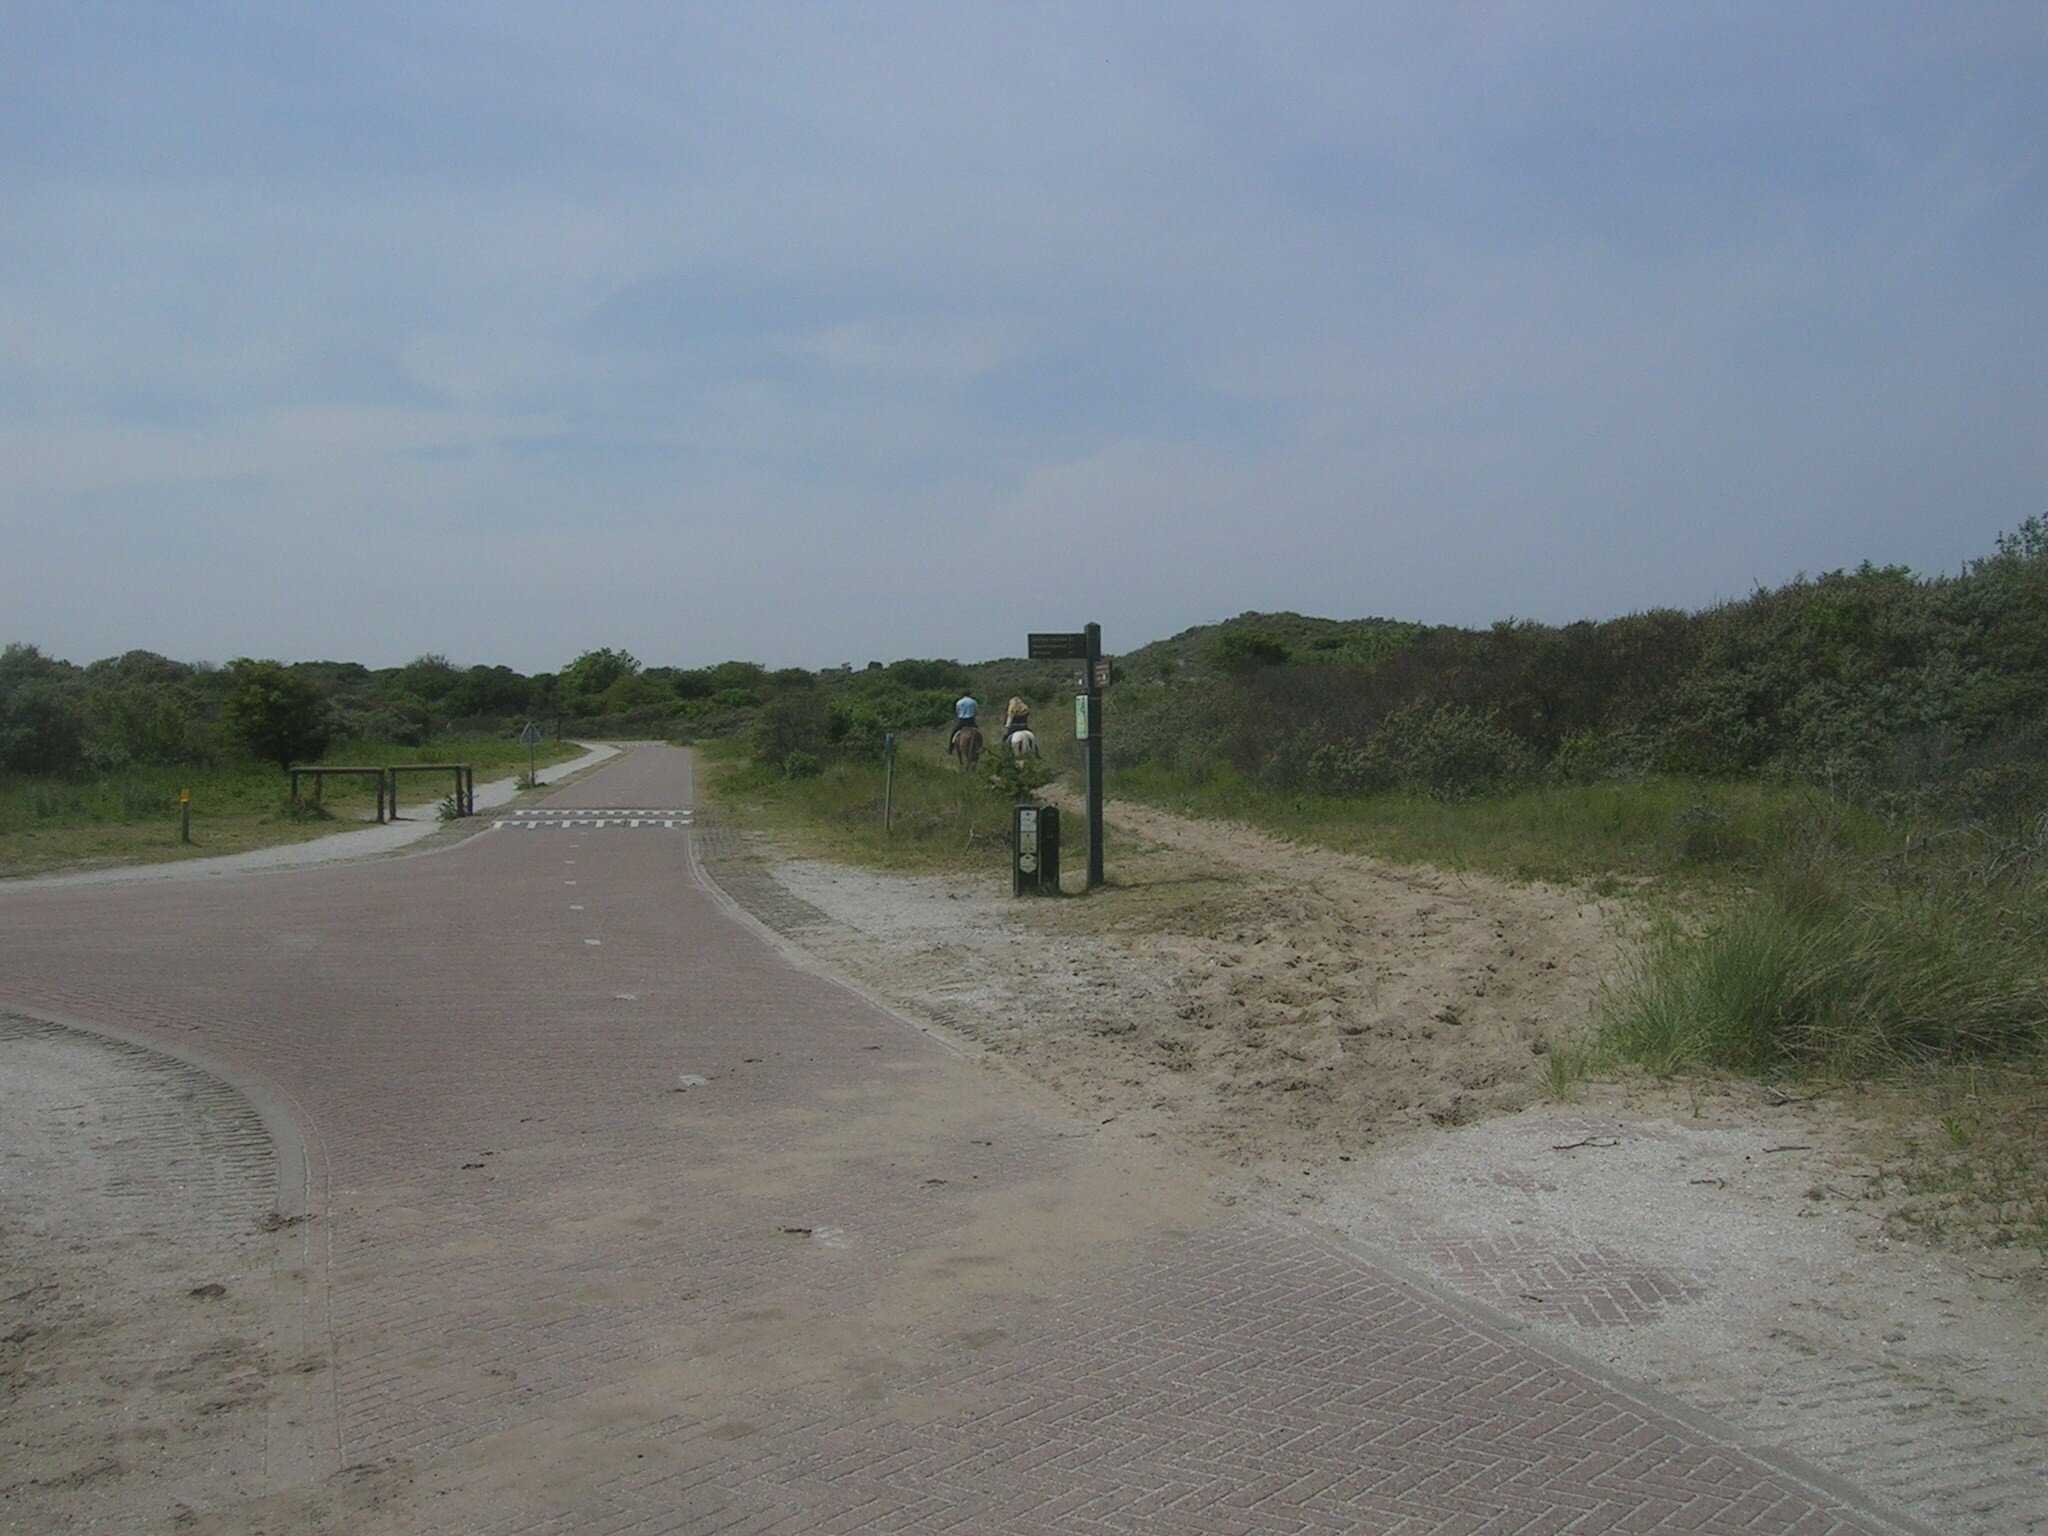 This is the Nordzeeroute in Holland that has separate paths for bikes, pedestrians, &amp; horses. We're not there yet here in Marin or the USA, per se.